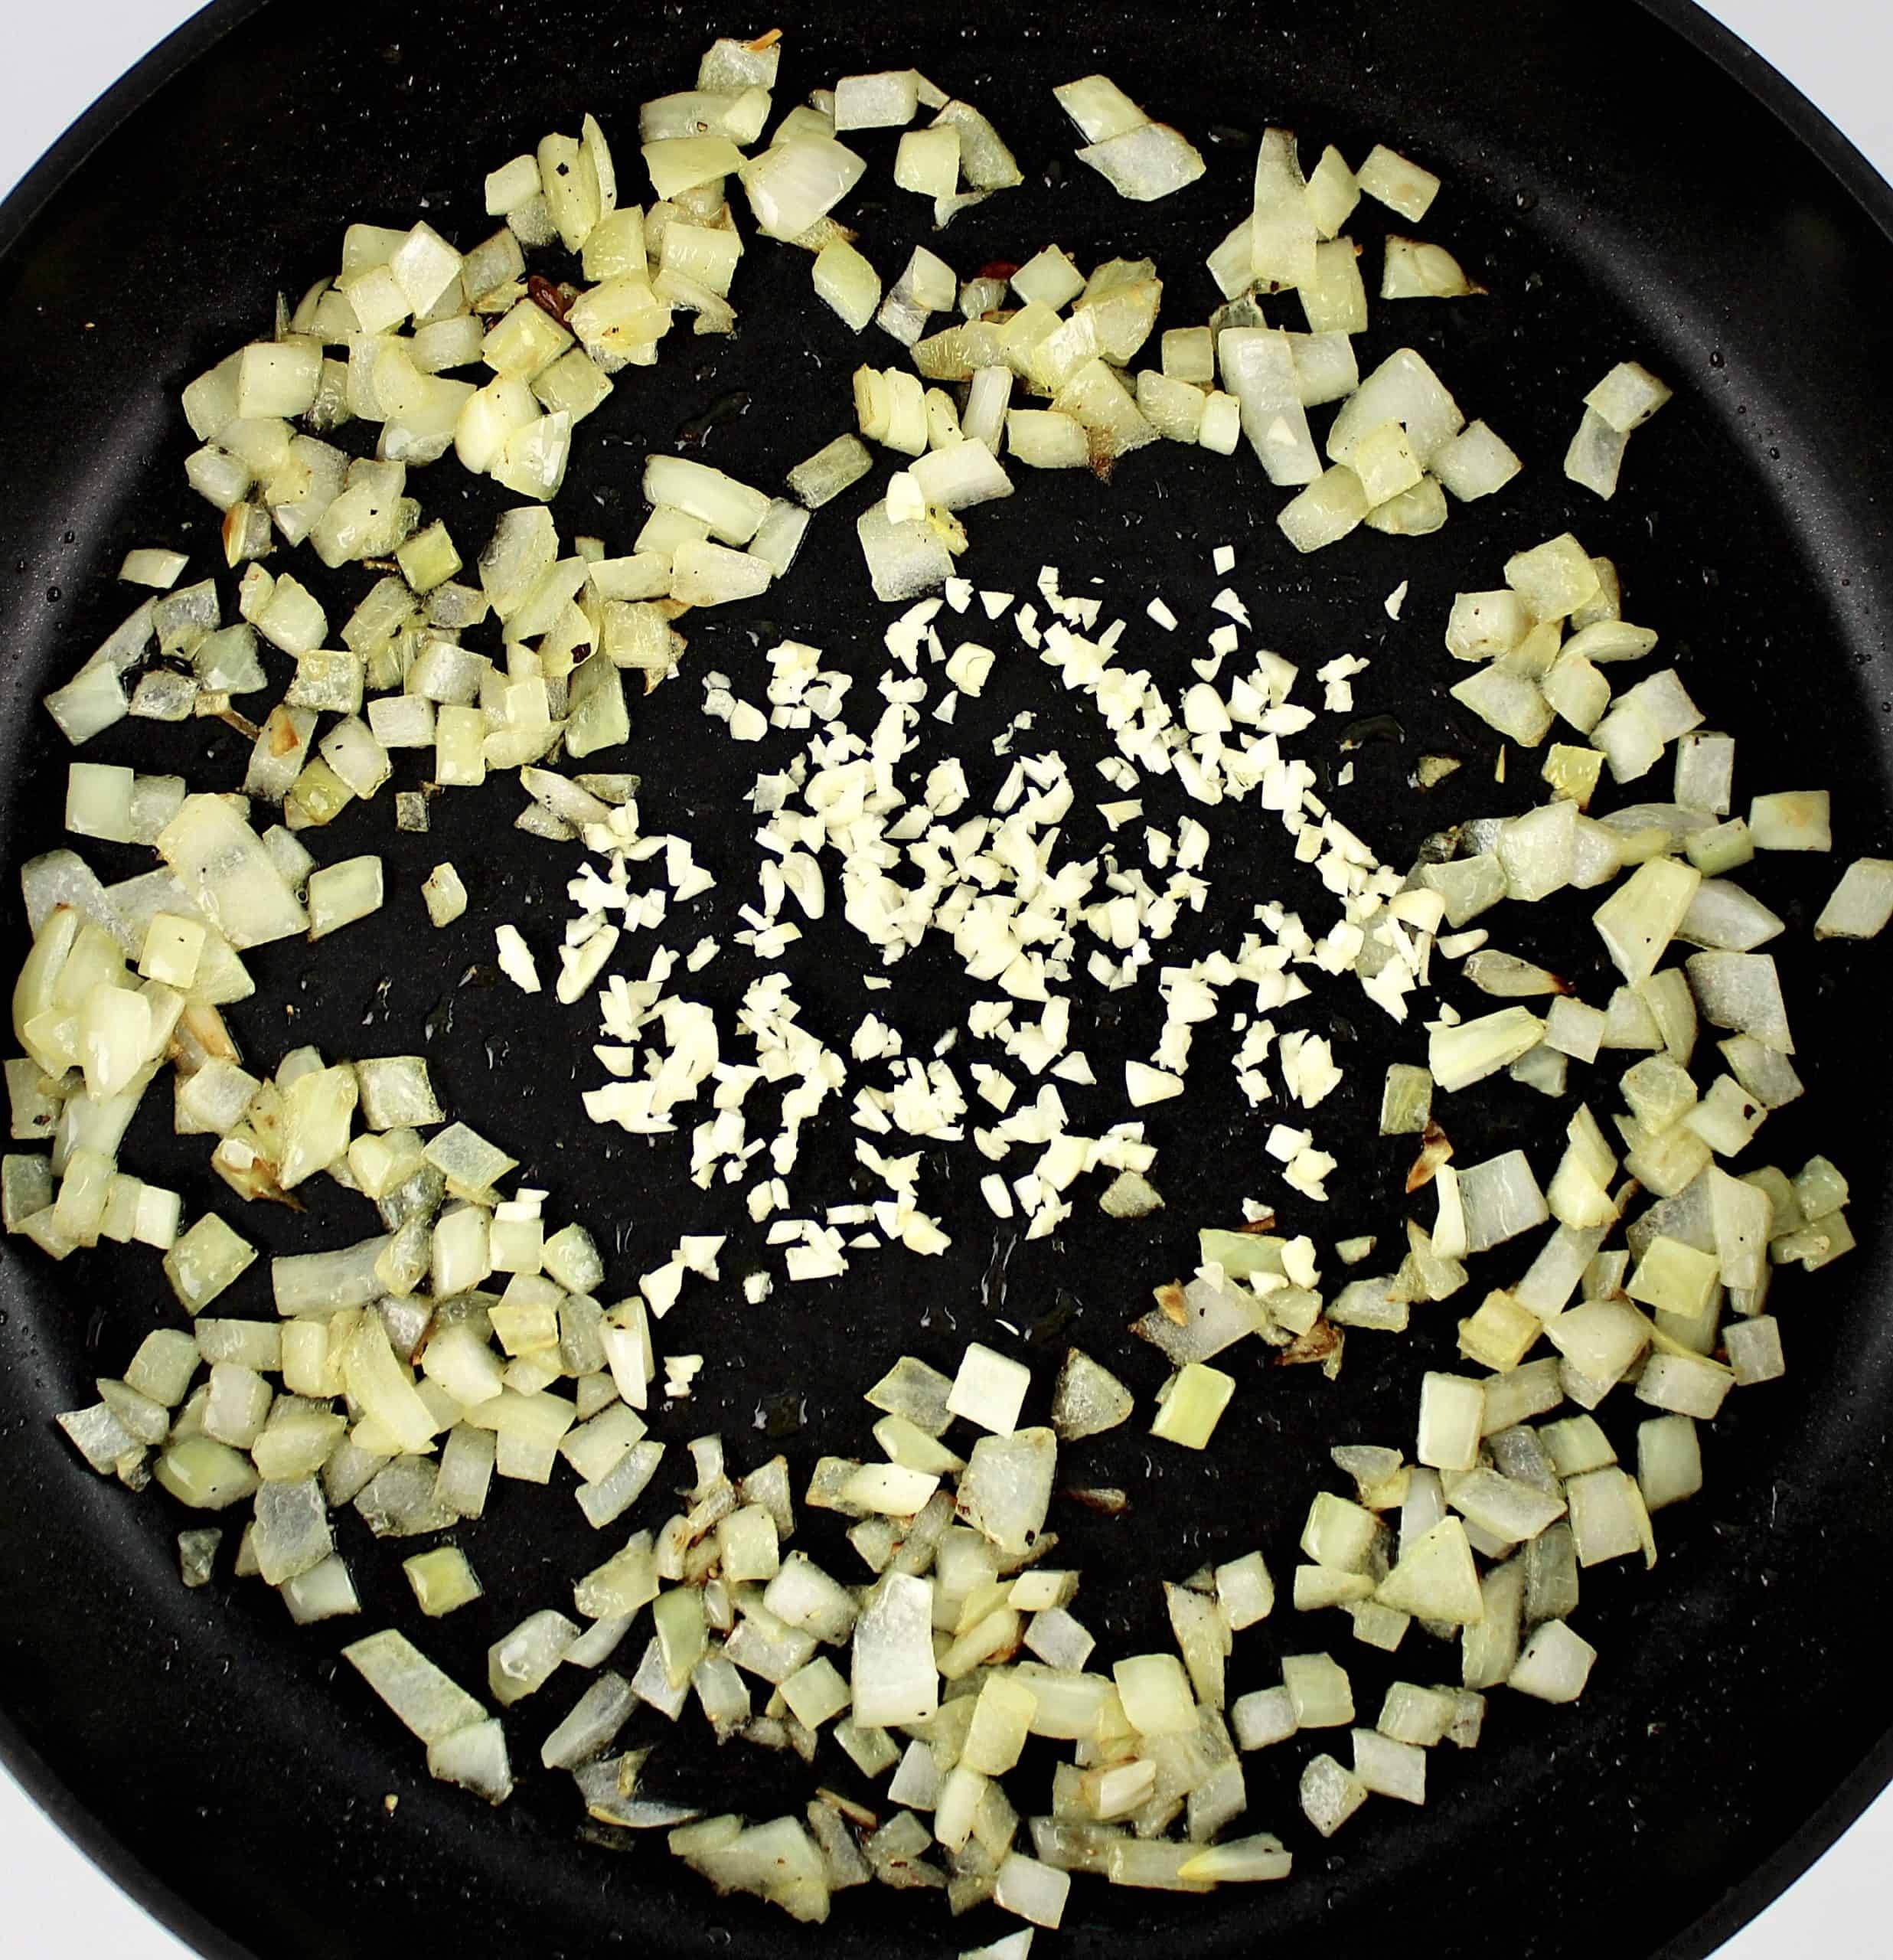 diced onions and minced garlic in center sauteing in skillet